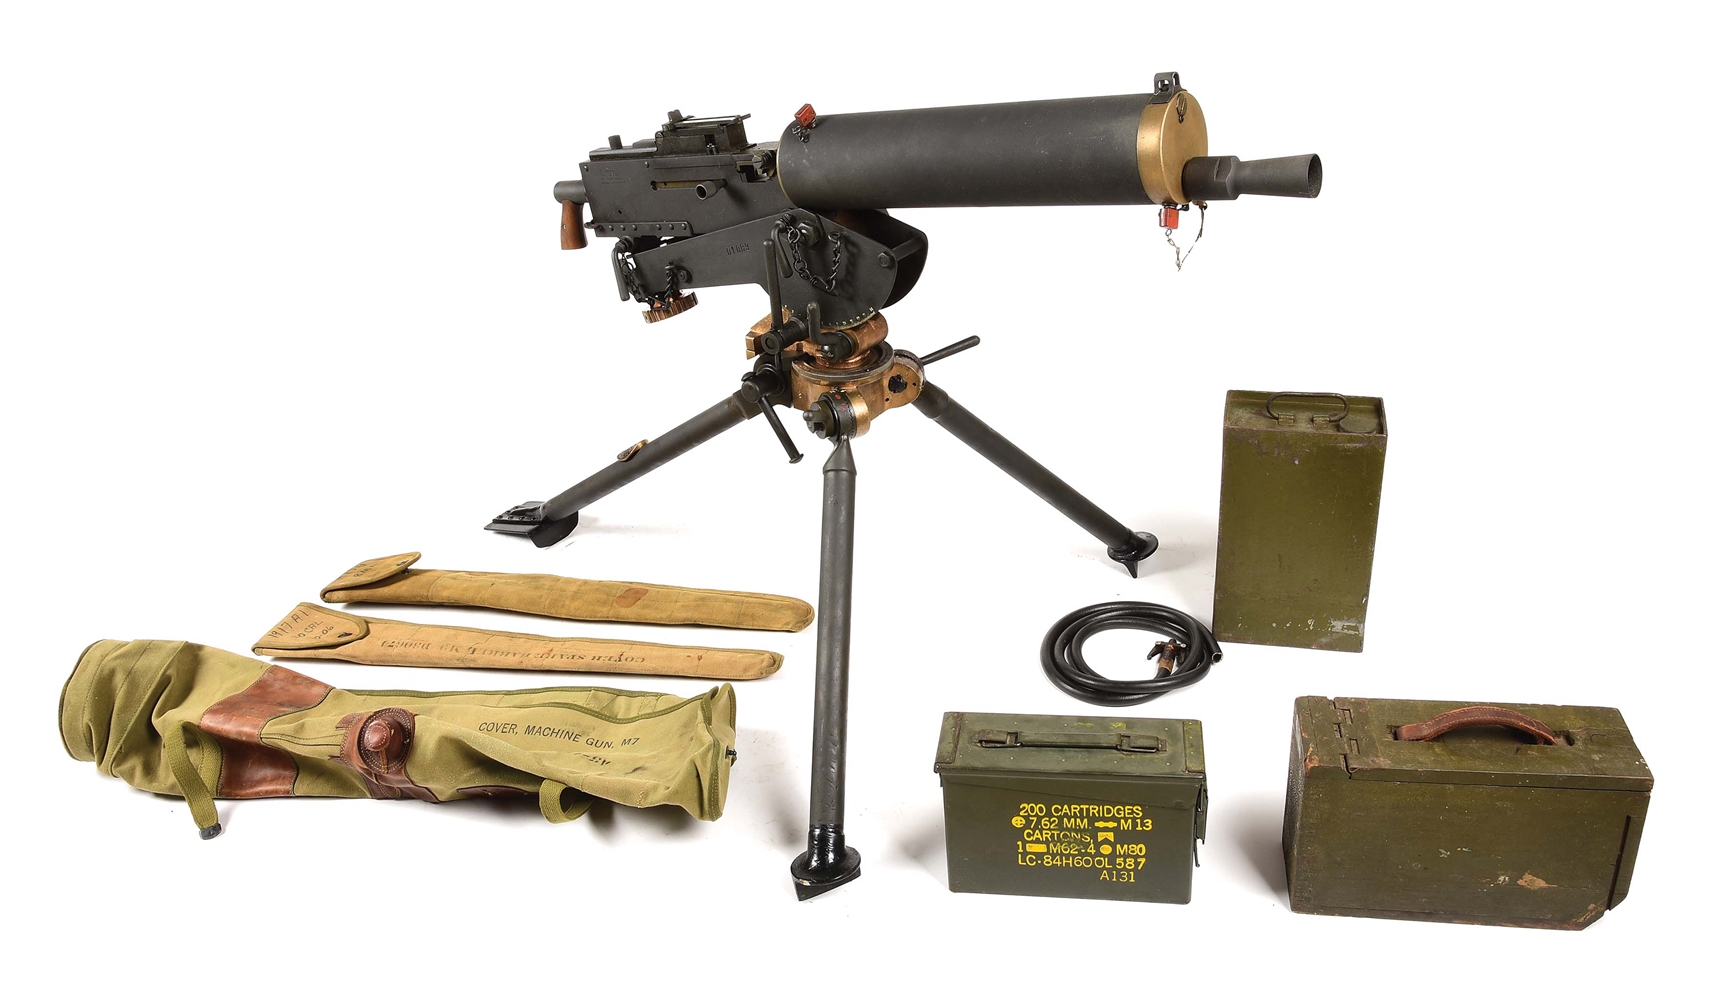 (N) OZARK MOUNTAIN ARSENAL MODEL 1917A1 MACHINE GUN WITH ACCESSORIES (FULLY TRANSFERABLE).